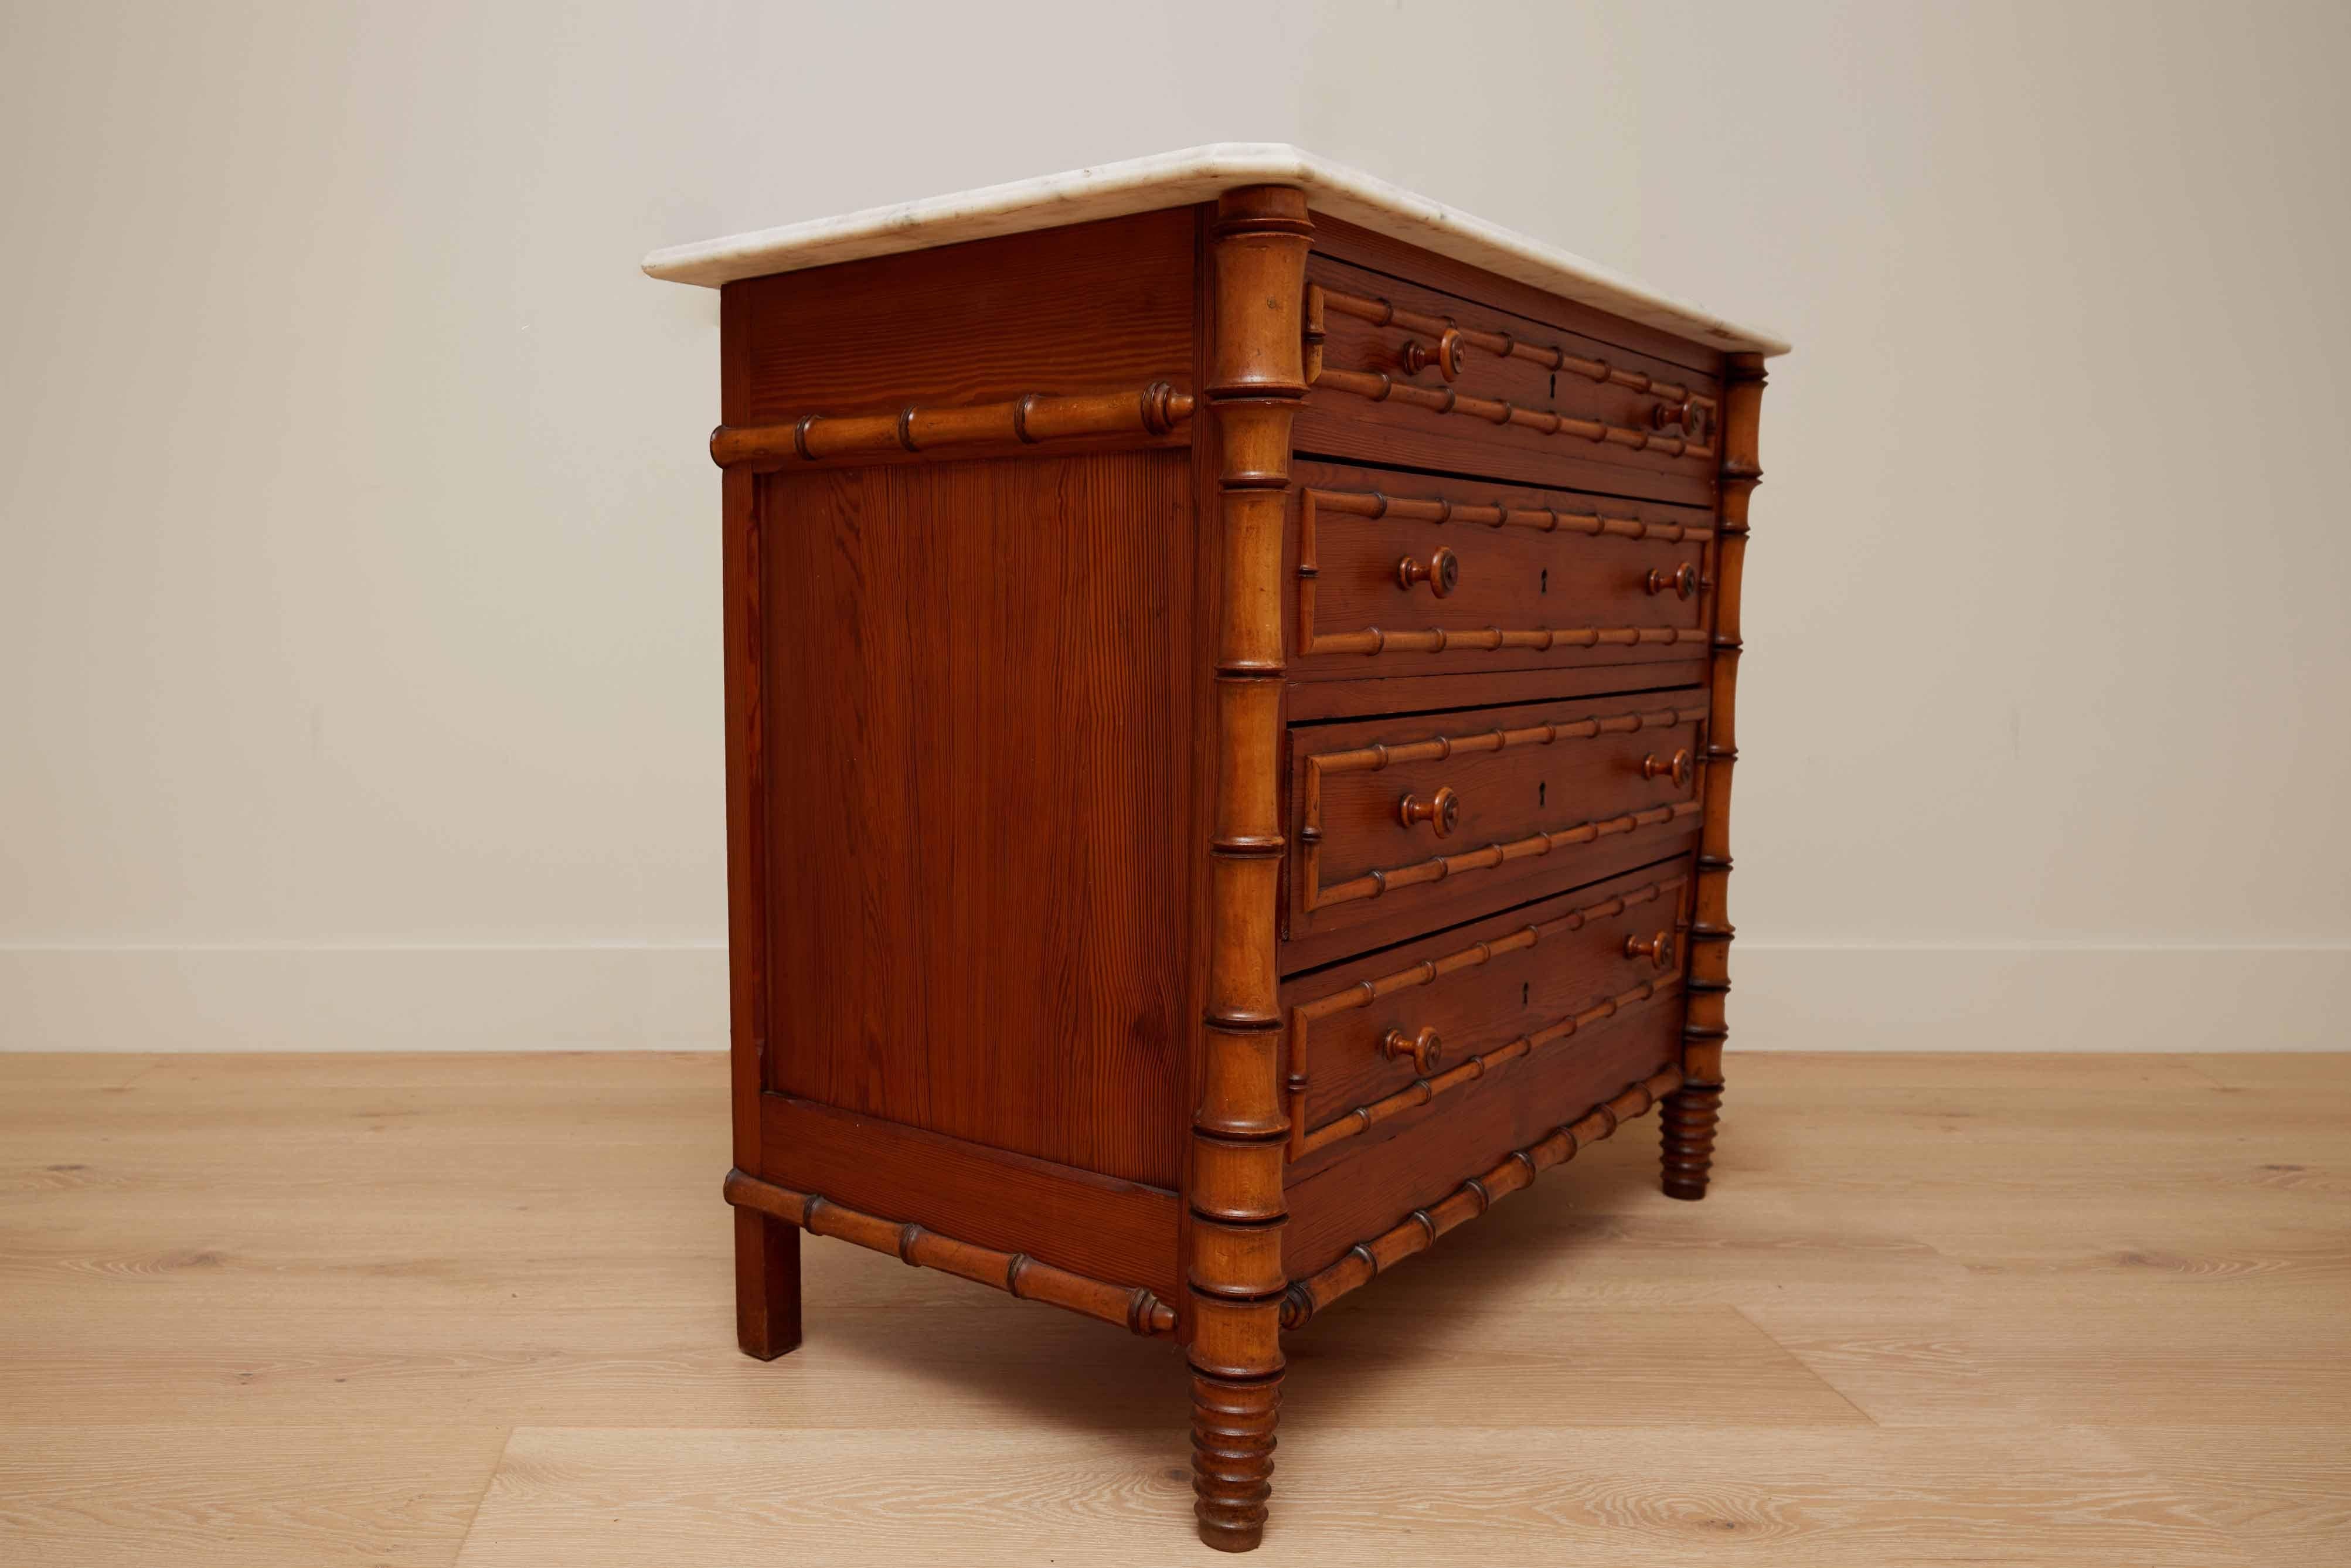 Carrara Marble 19th-C. French Faux Bamboo Pine & Marble Chest / Commode